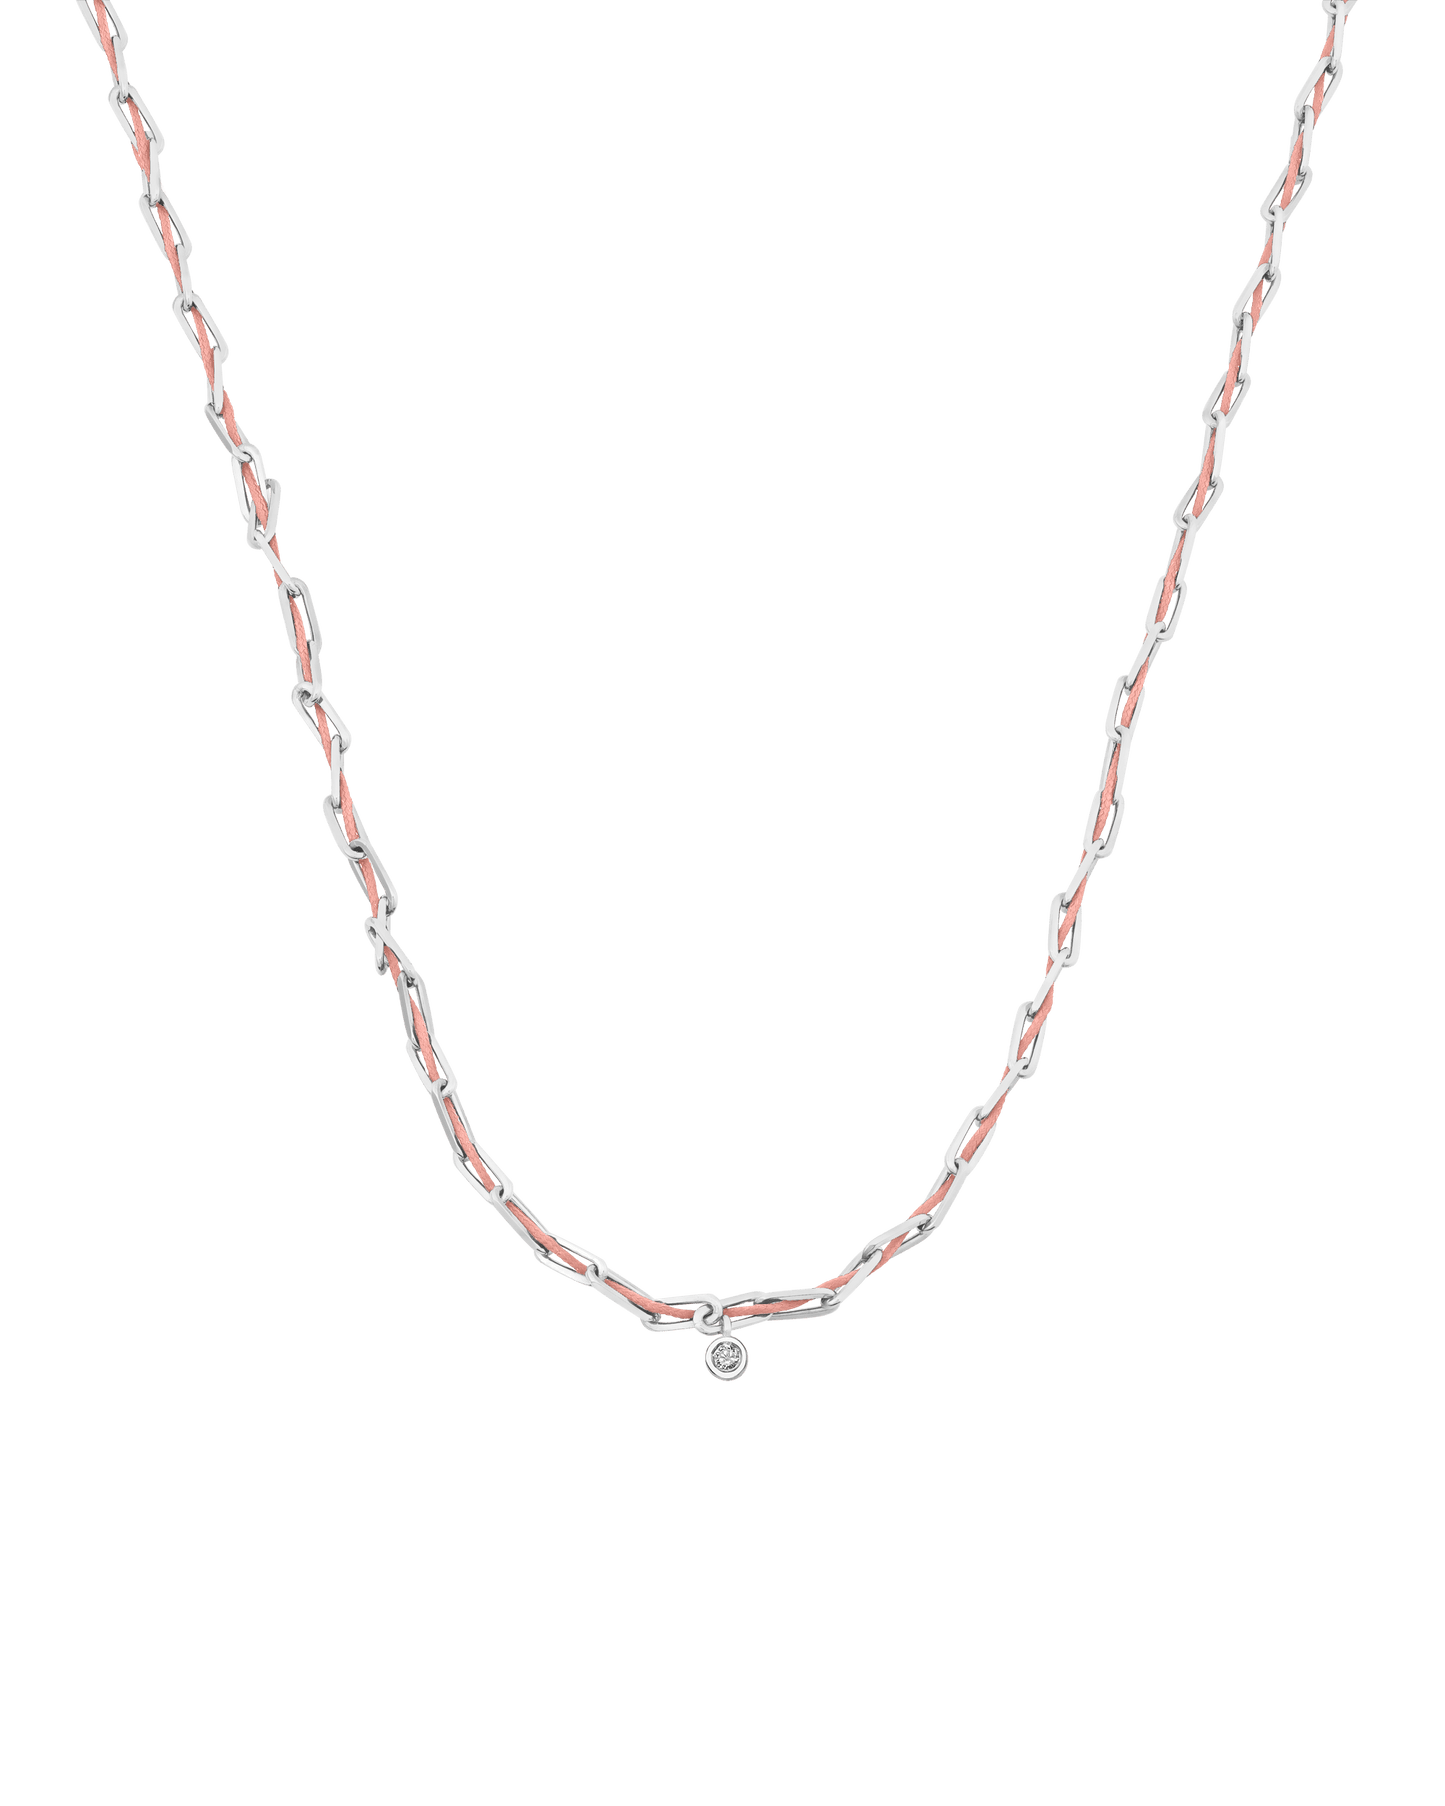 Twine Diamond Necklace - 925 Sterling Silver Necklaces magal-dev Pink Medium: 0.05ct 16"